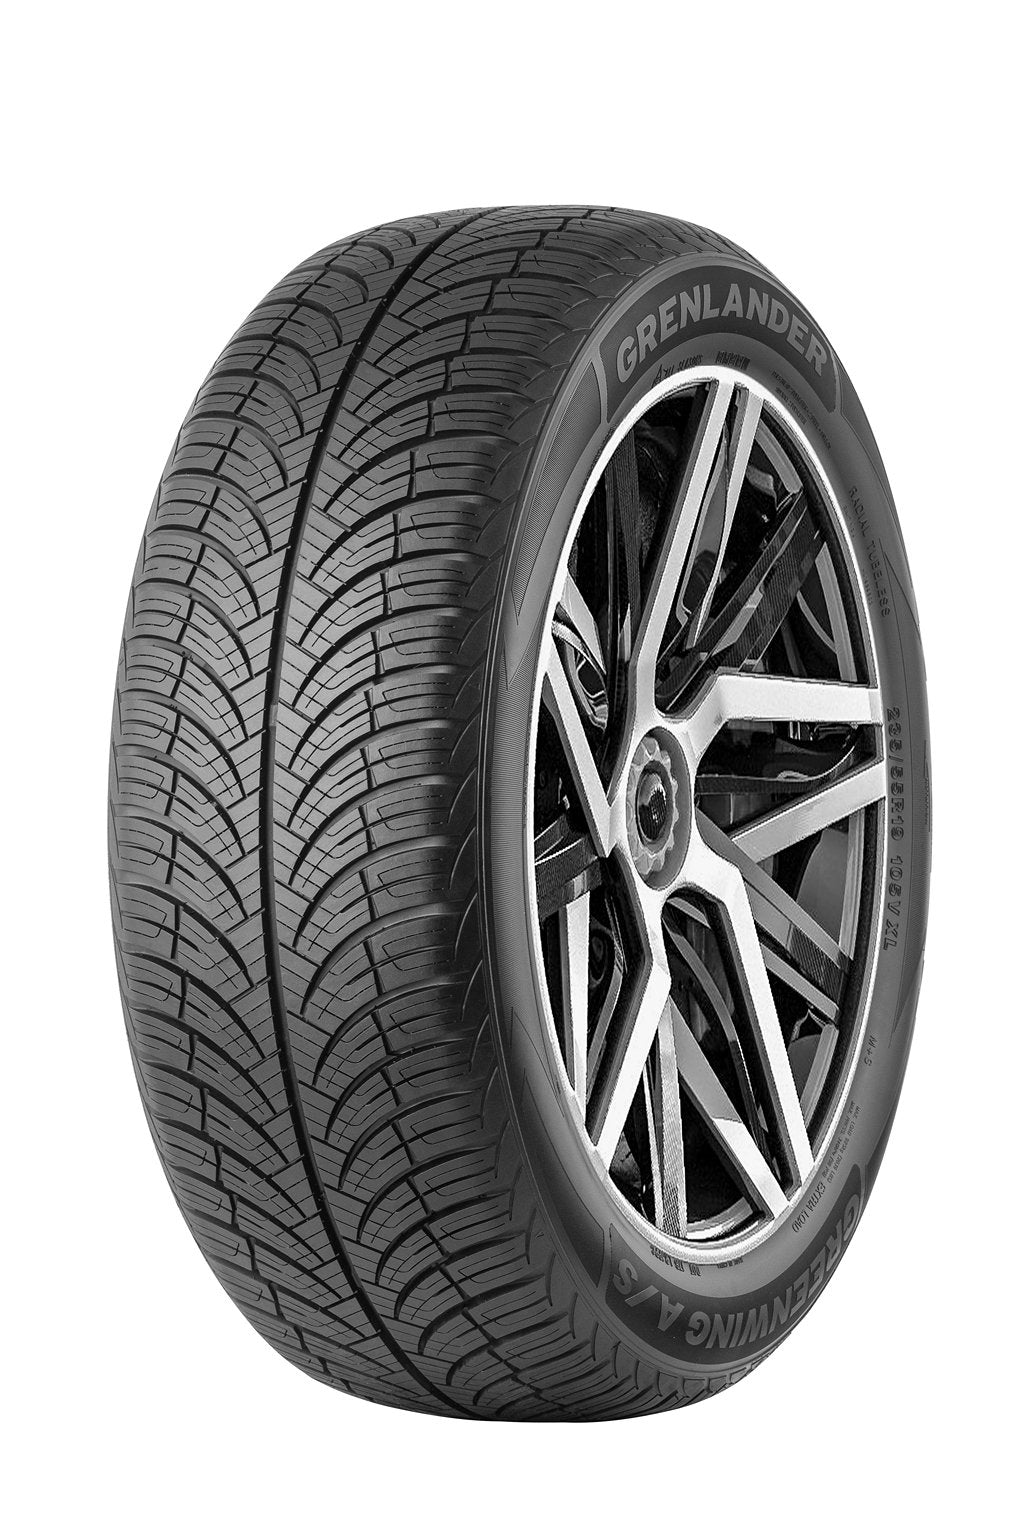 205/55R16 GRENLANDER GREENWING A/S ALL WEATHER - Toee Tire